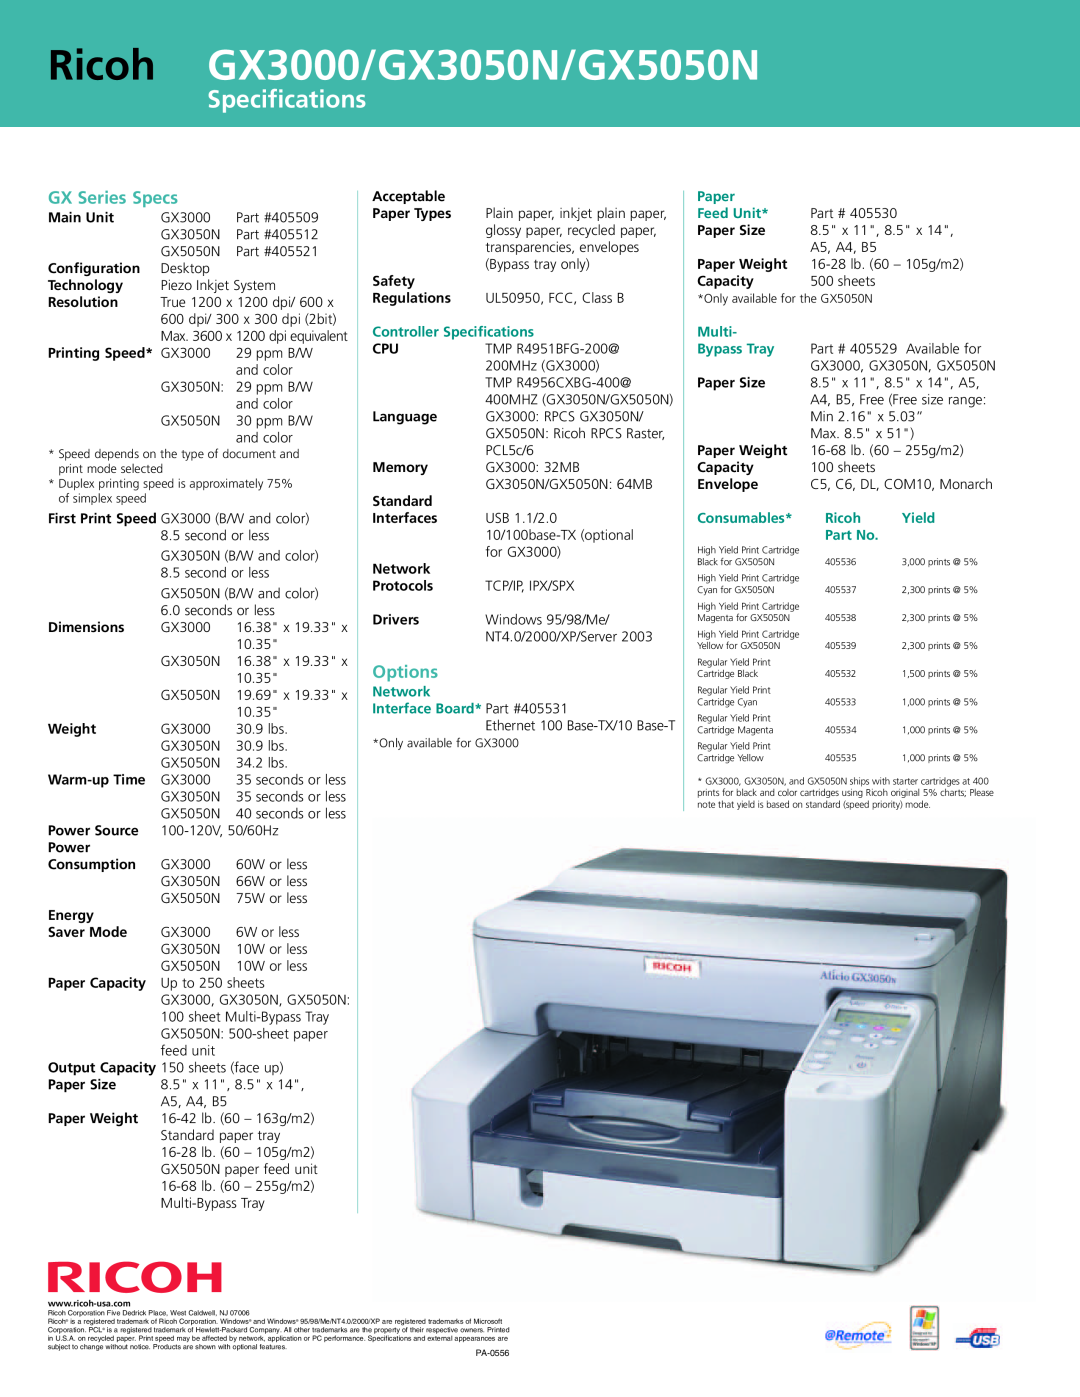 Ricoh Ricoh GX3000/GX3050N/GX5050N, GX Series Specs, Options, Controller Specifications, Network Interface Board 